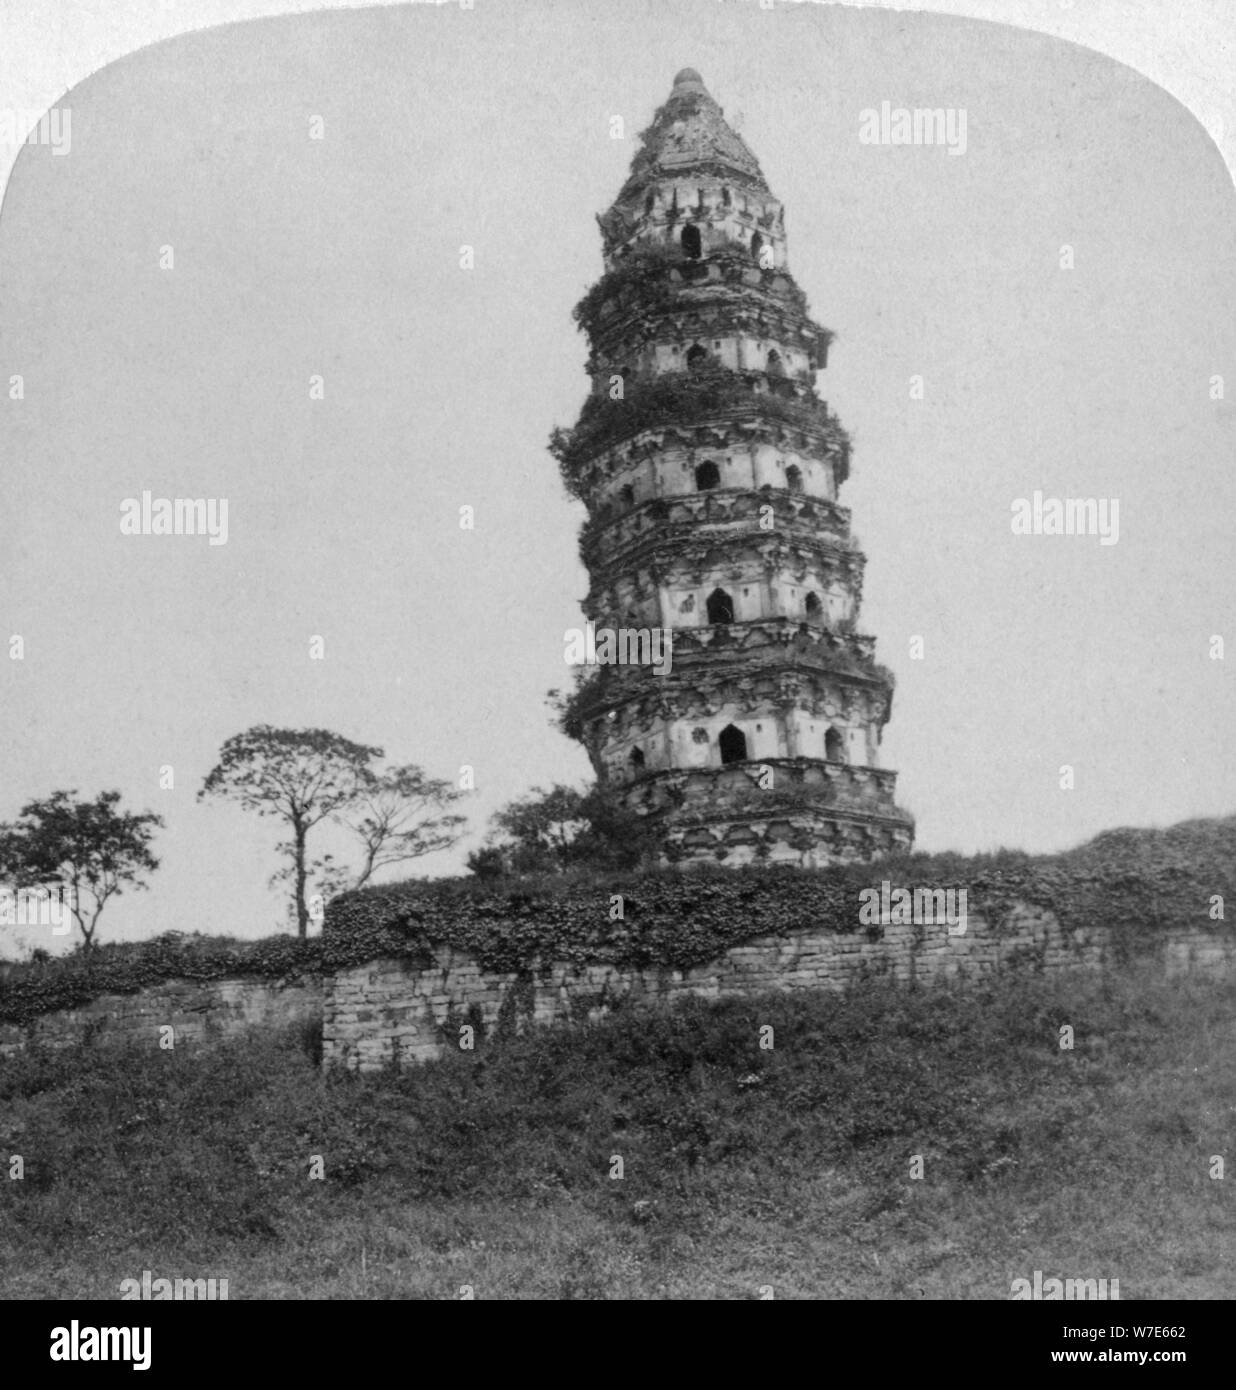 'Tiger Hill Pagoda, the 'Leaning Tower', of Soo-Chow' (Suzhou), China, 1900. Artist: Underwood & Underwood Stock Photo